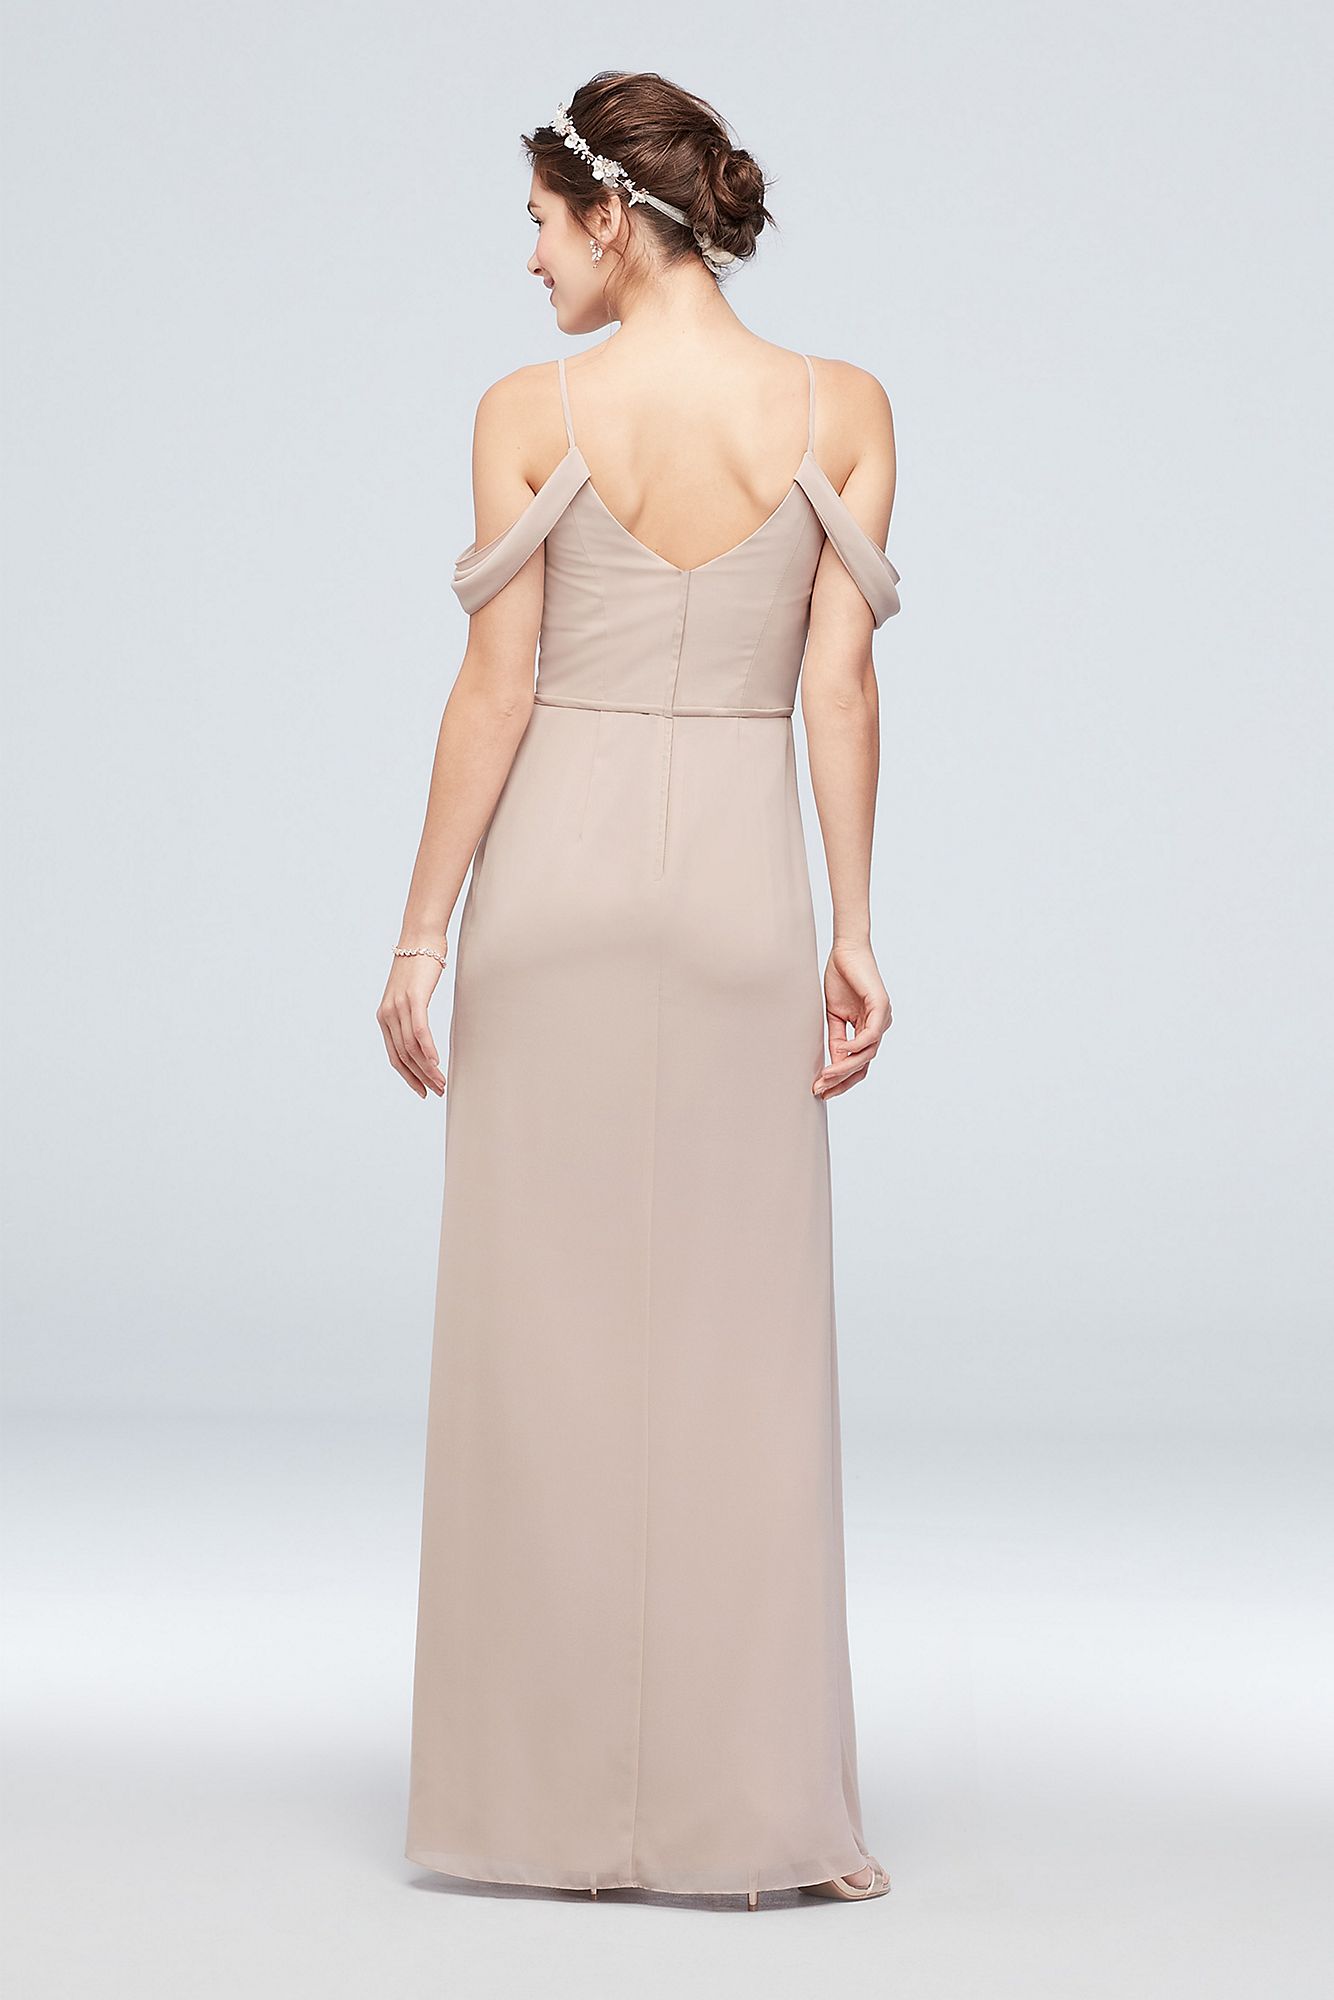 Off-the-Shoulder Bridesmaid Dress with Cascade F20010